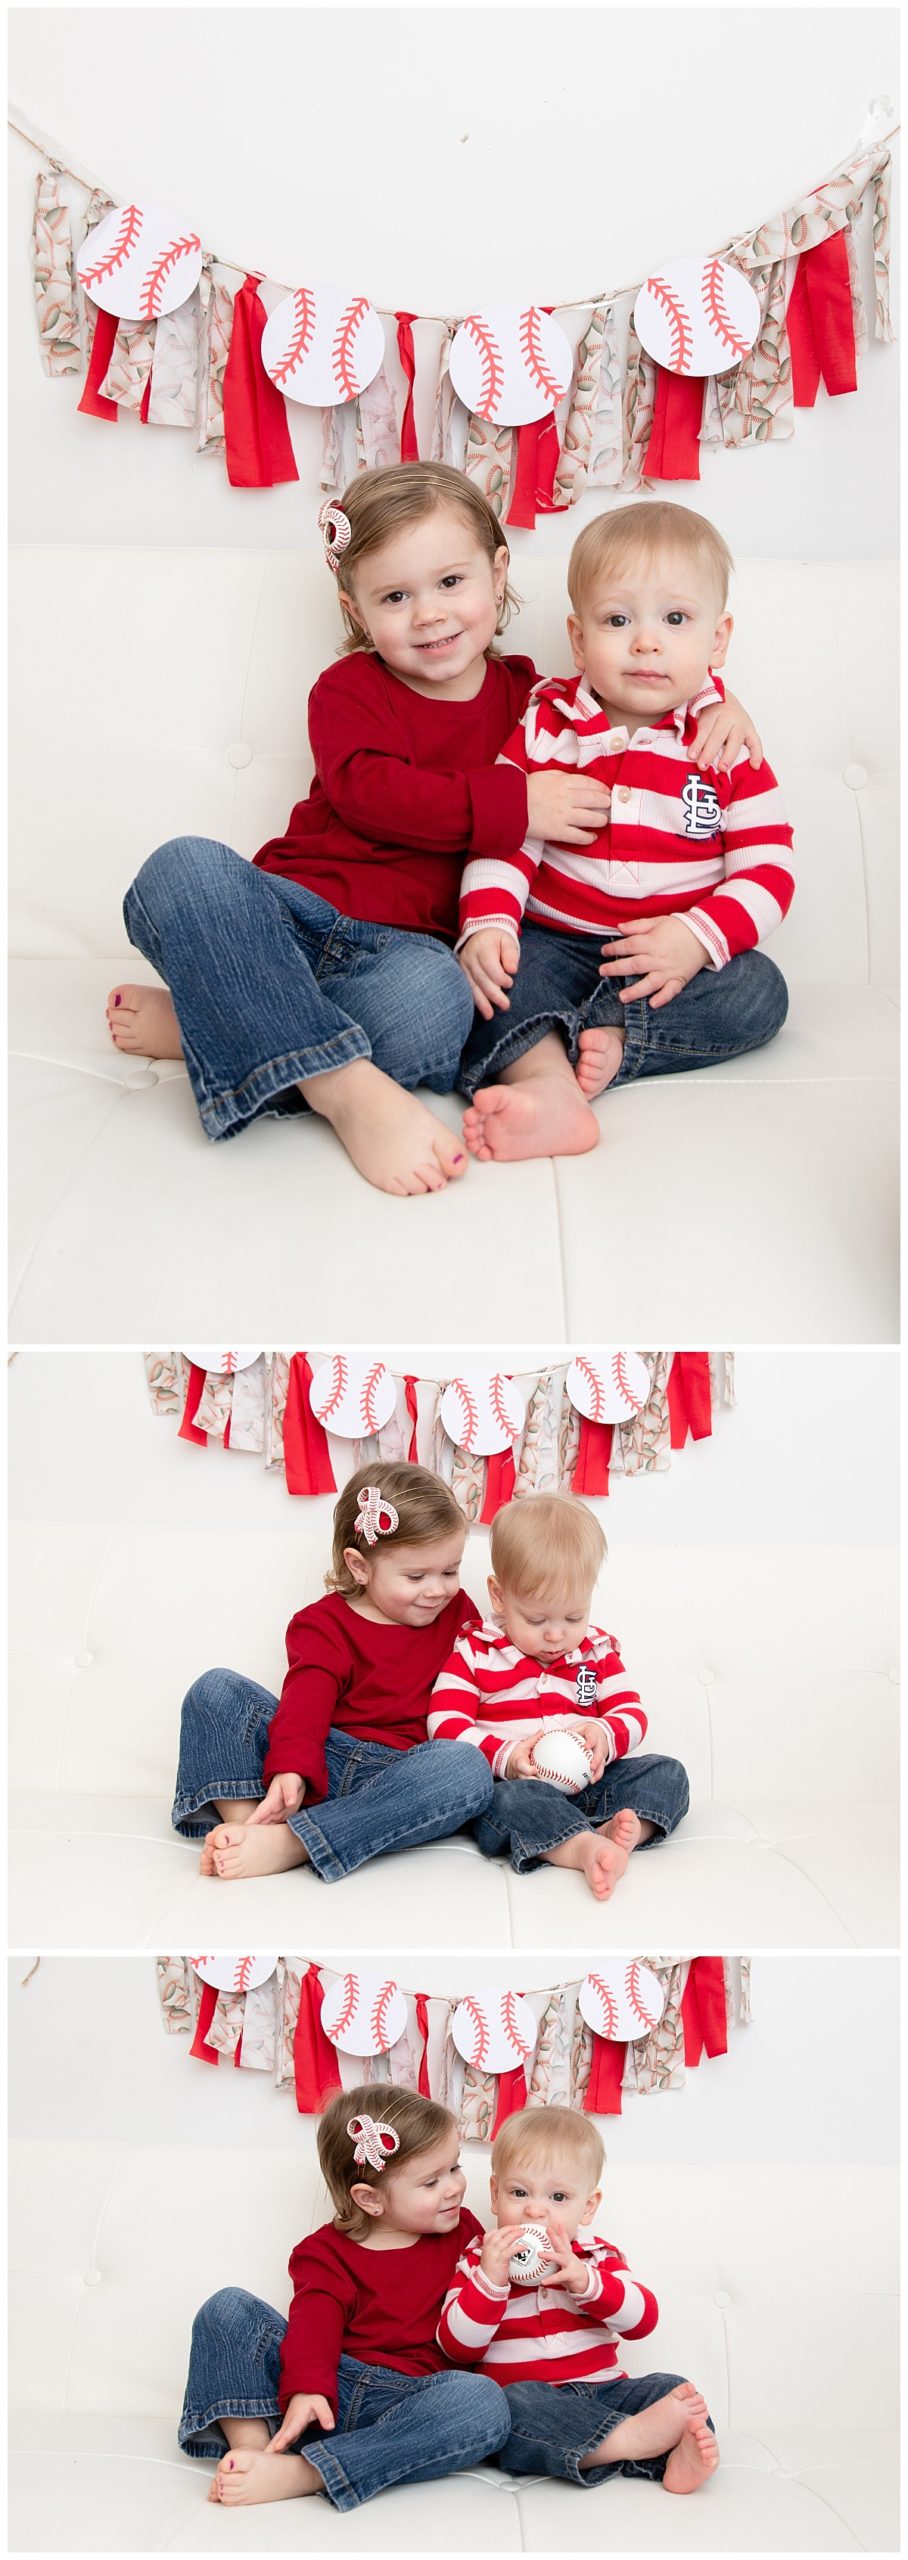 st-louis-family-photographer-st-louis-cardinals-family-pictures-big-sister-and-little-brother.jpg